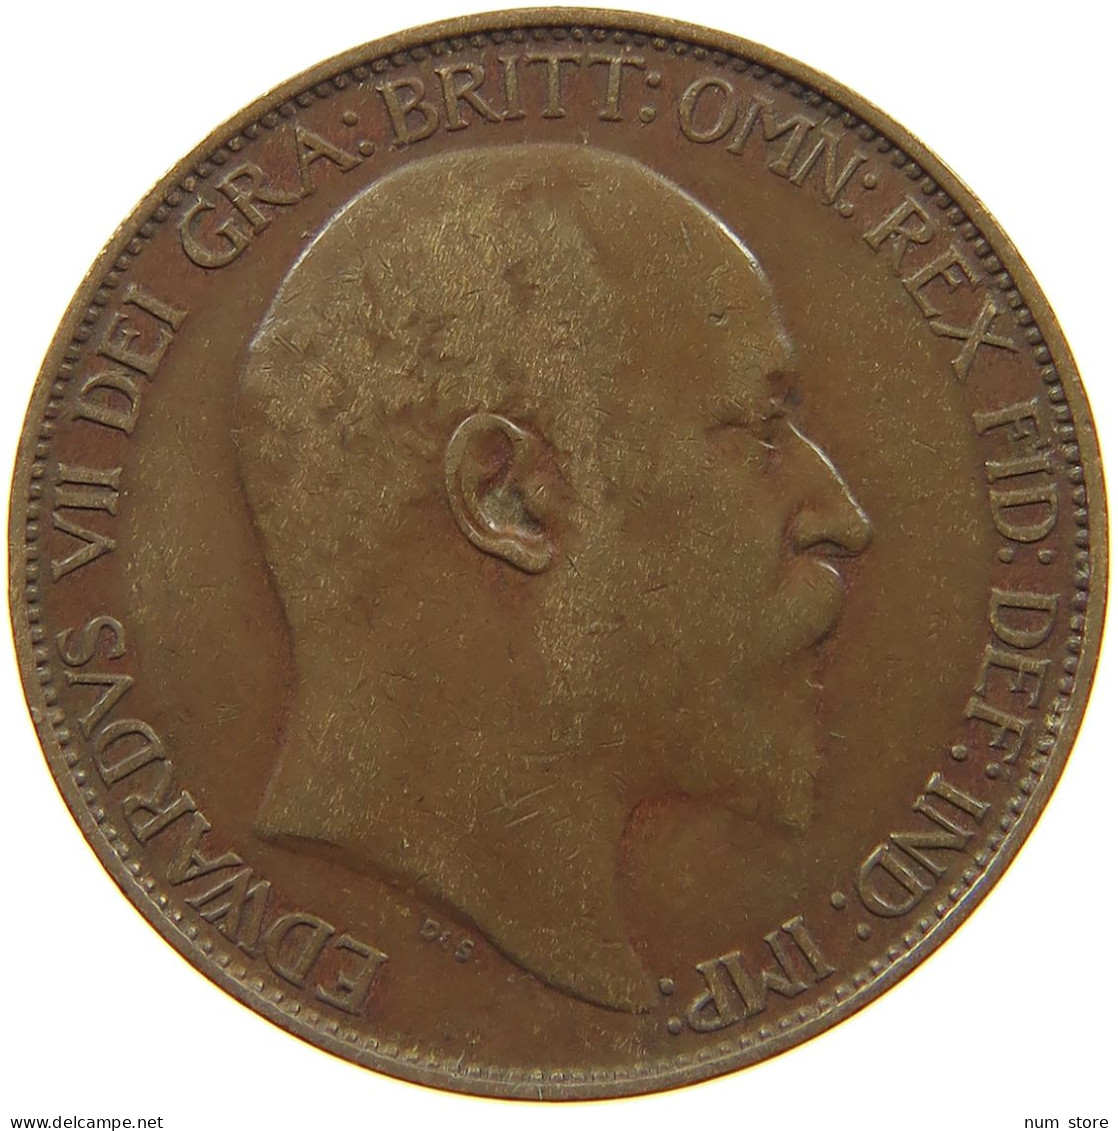 GREAT BRITAIN HALFPENNY 1908 #a058 0093 - C. 1/2 Penny